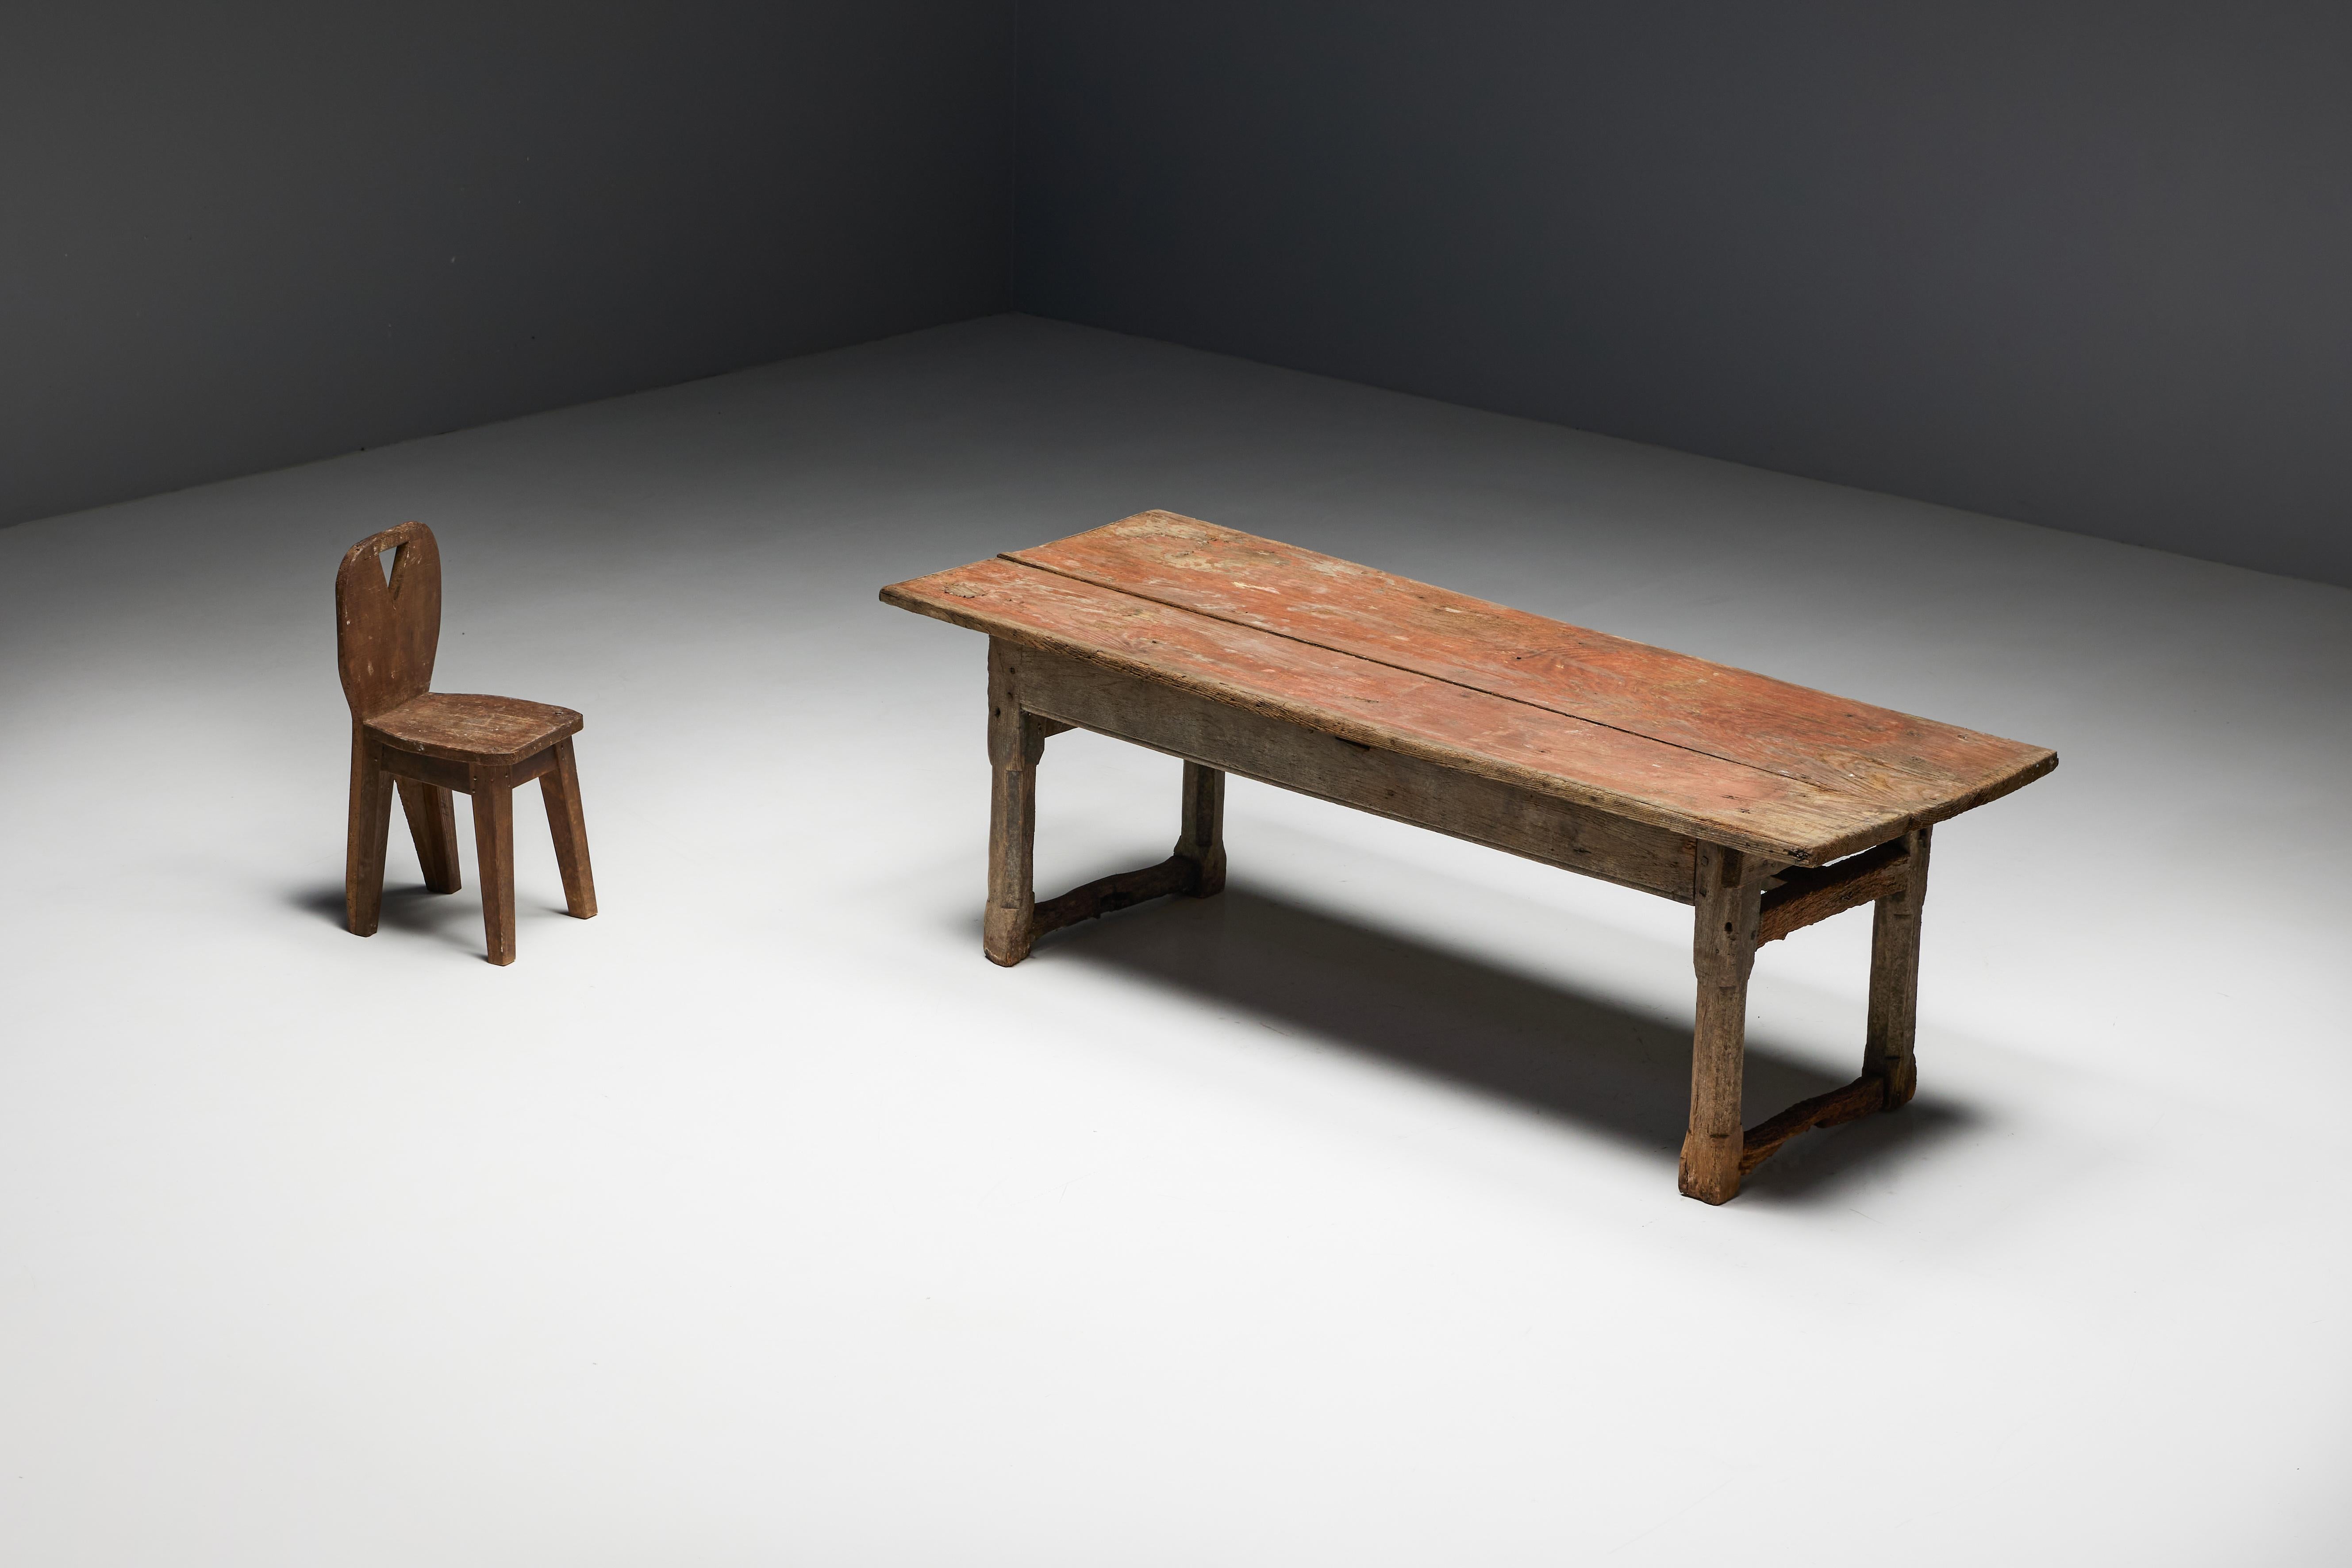 Rustic Travail Populaire Dining Table, France, Early 19th Century For Sale 7